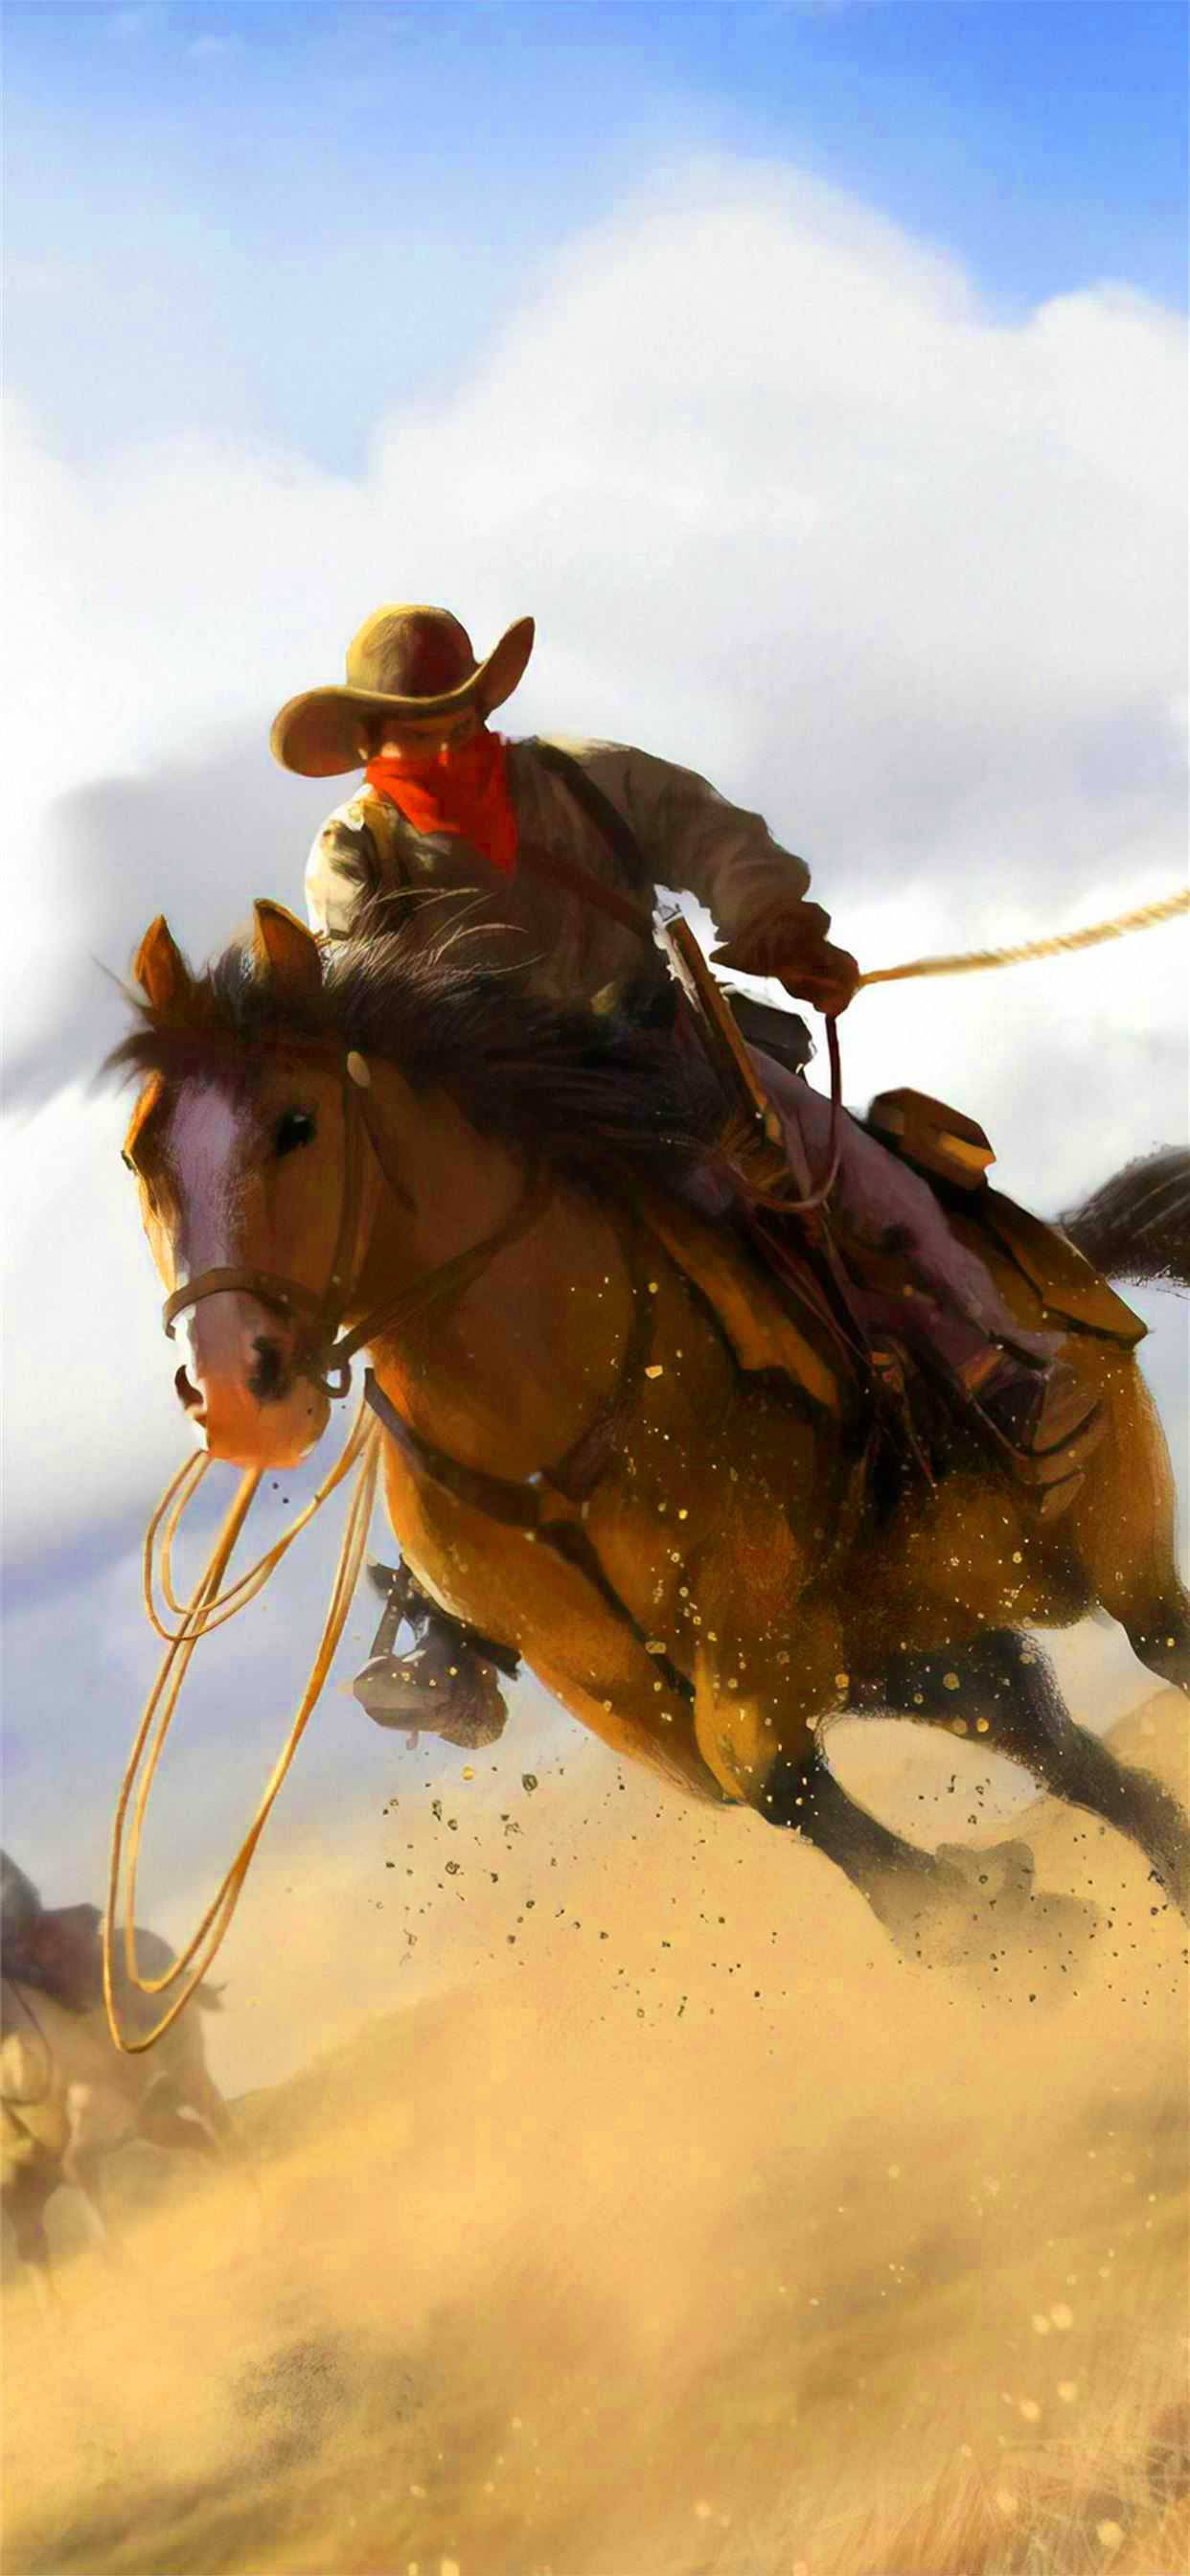 Country Western Galloping Horse Cowboy Wallpaper